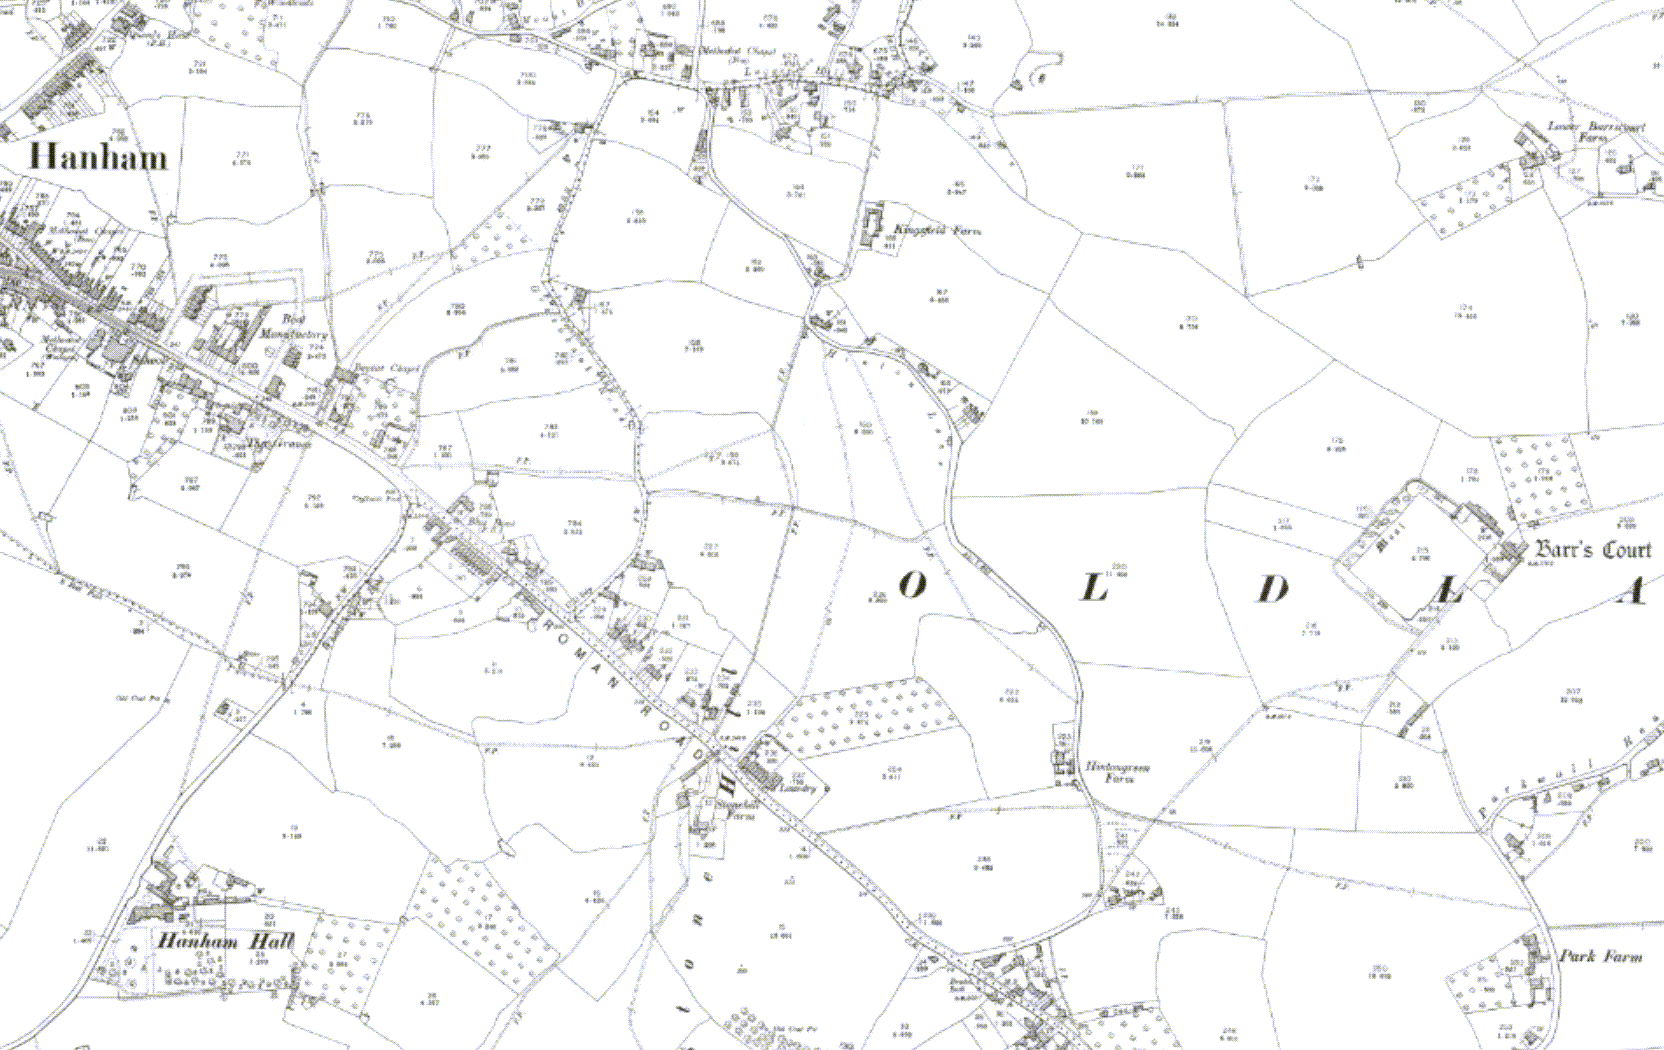 Figure 2: Map of part of Oldland showing Barr’s Court - c1902